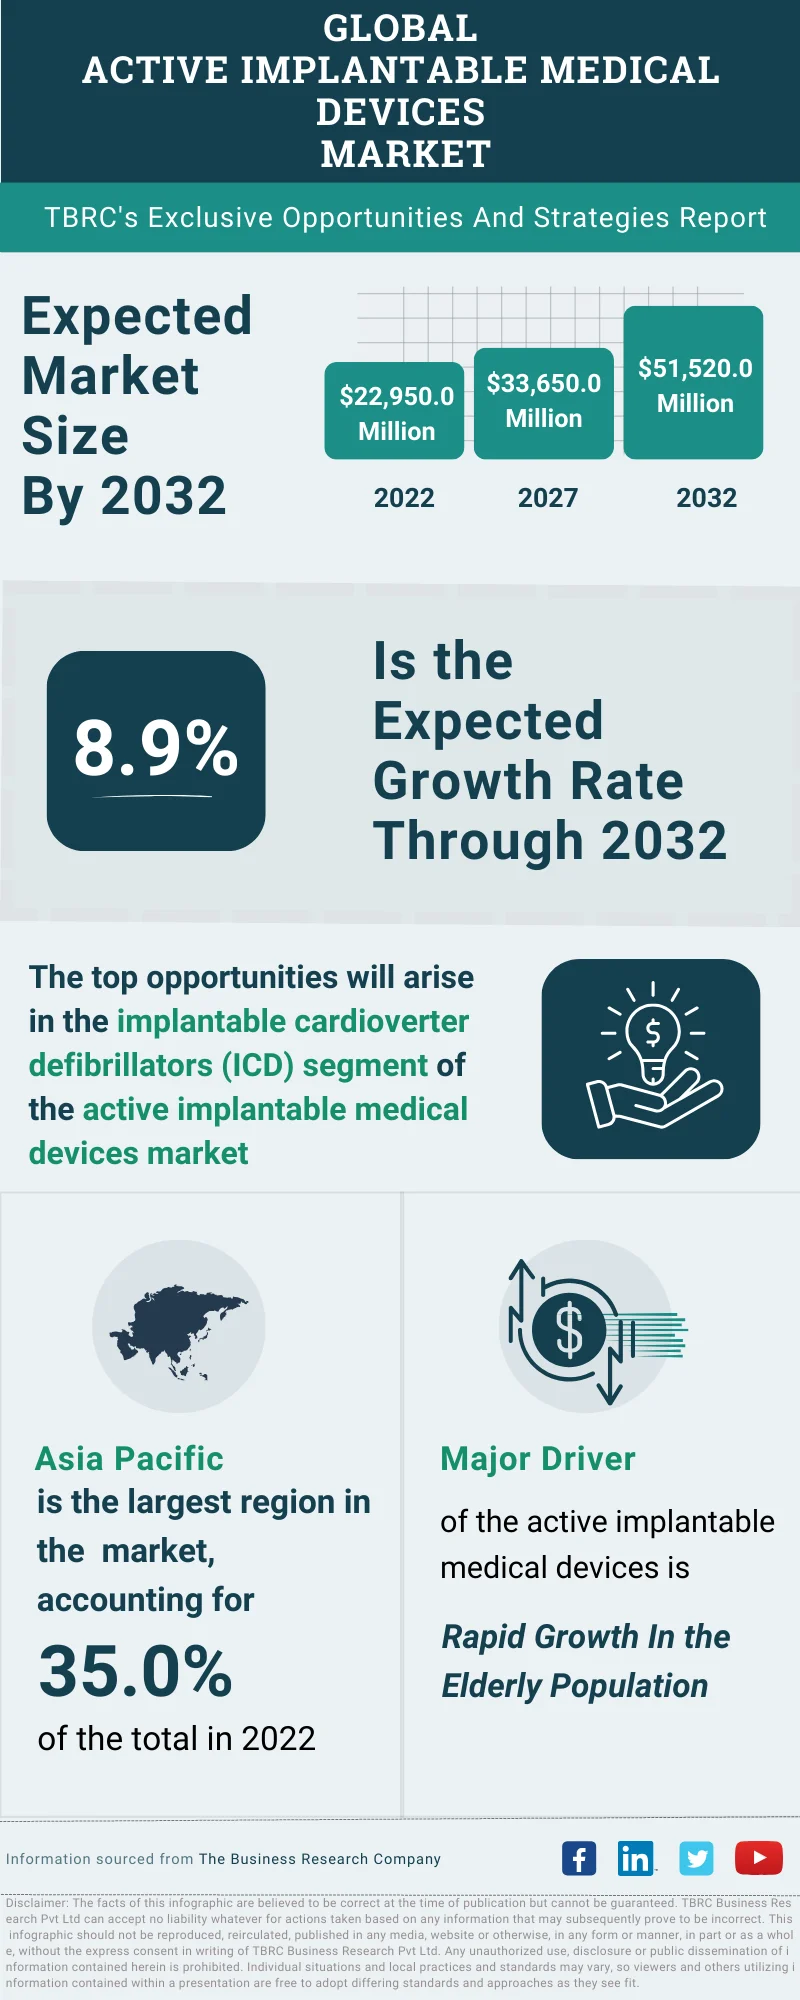 Active Implantable Medical Devices Global Market Opportunities And Strategies To 2032